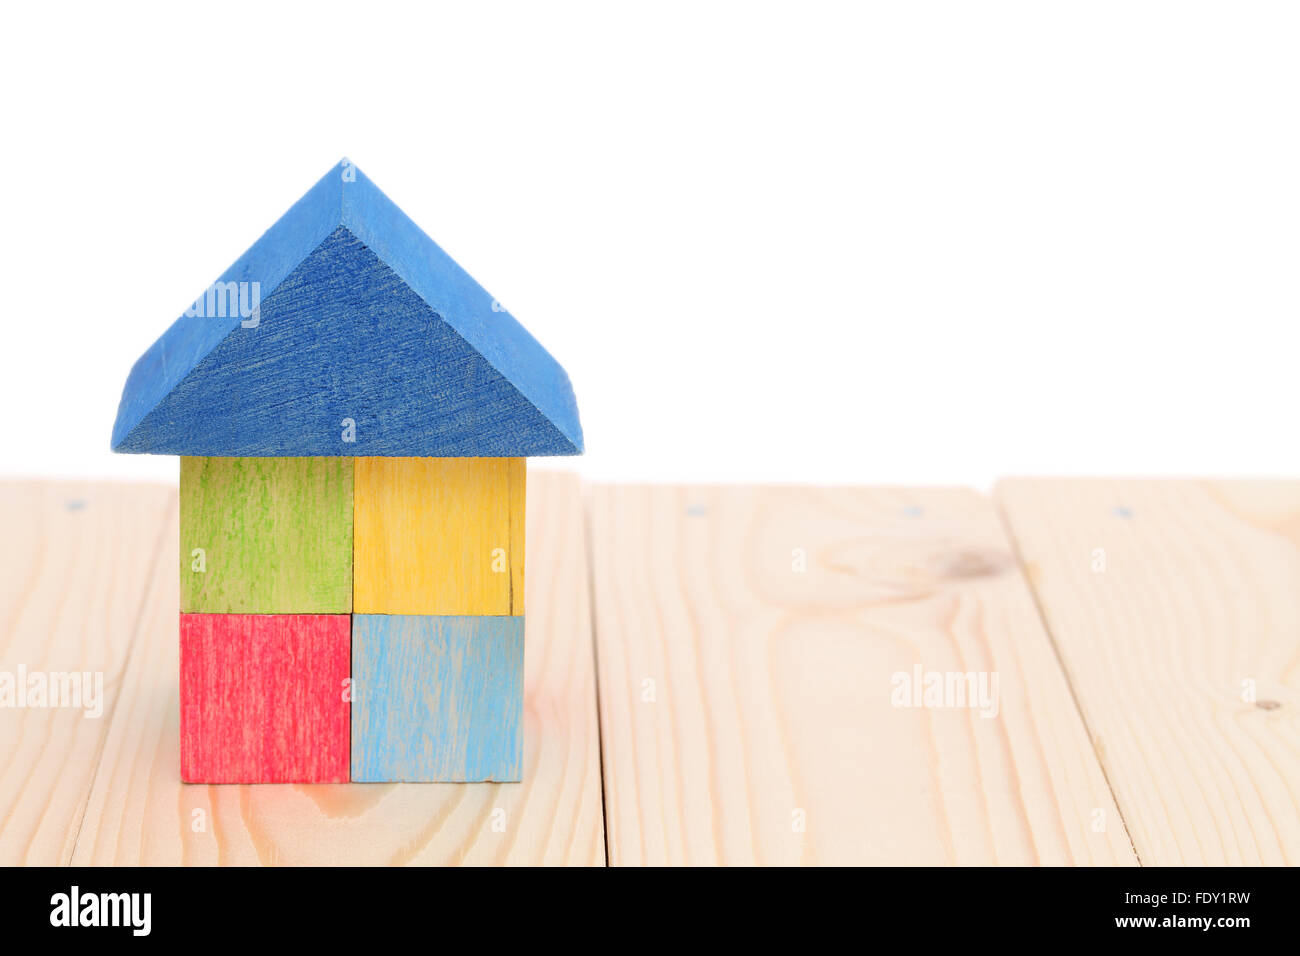 wooden toy house with colored toy blocks Stock Photo